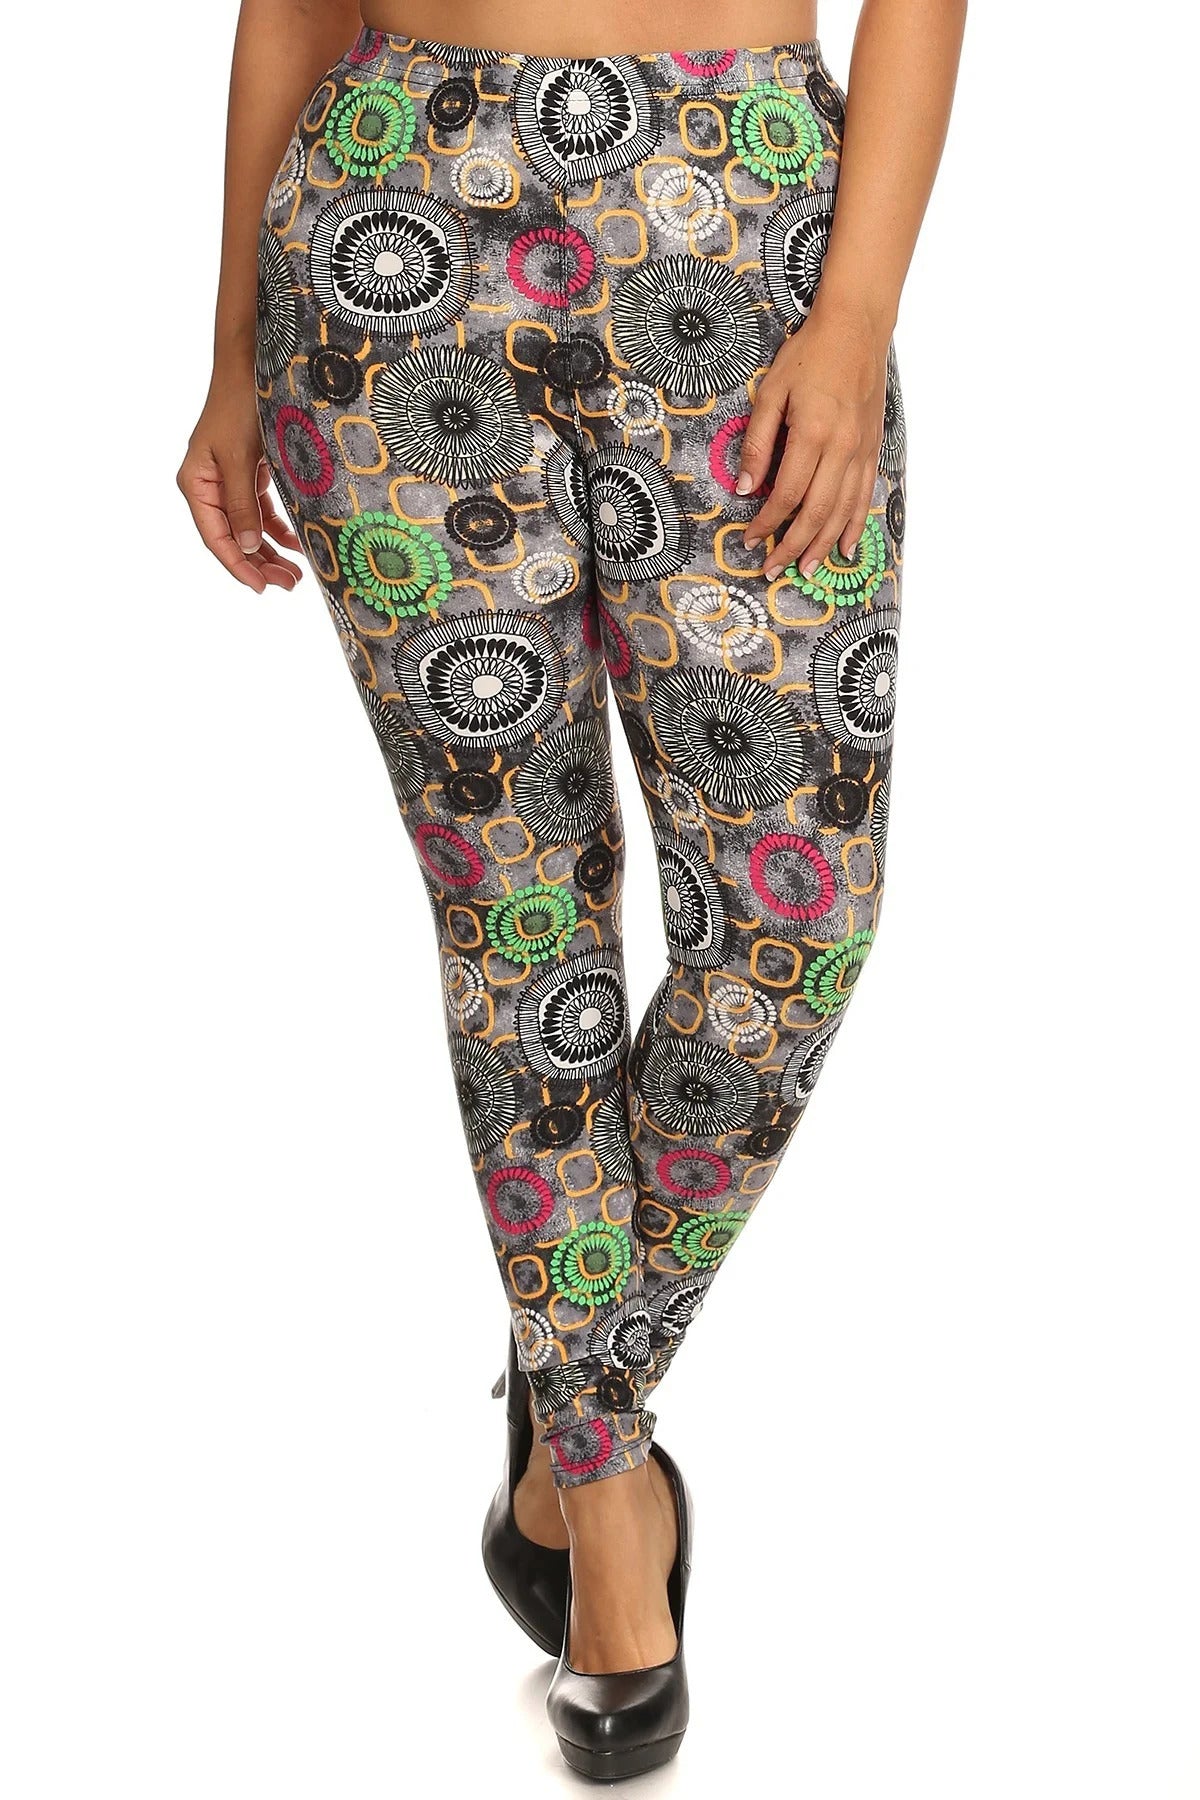 Voluptuous (+) Plus Size Abstract Print Slim Fit Leggings - Ships from The USA - women's leggings at TFC&H Co.